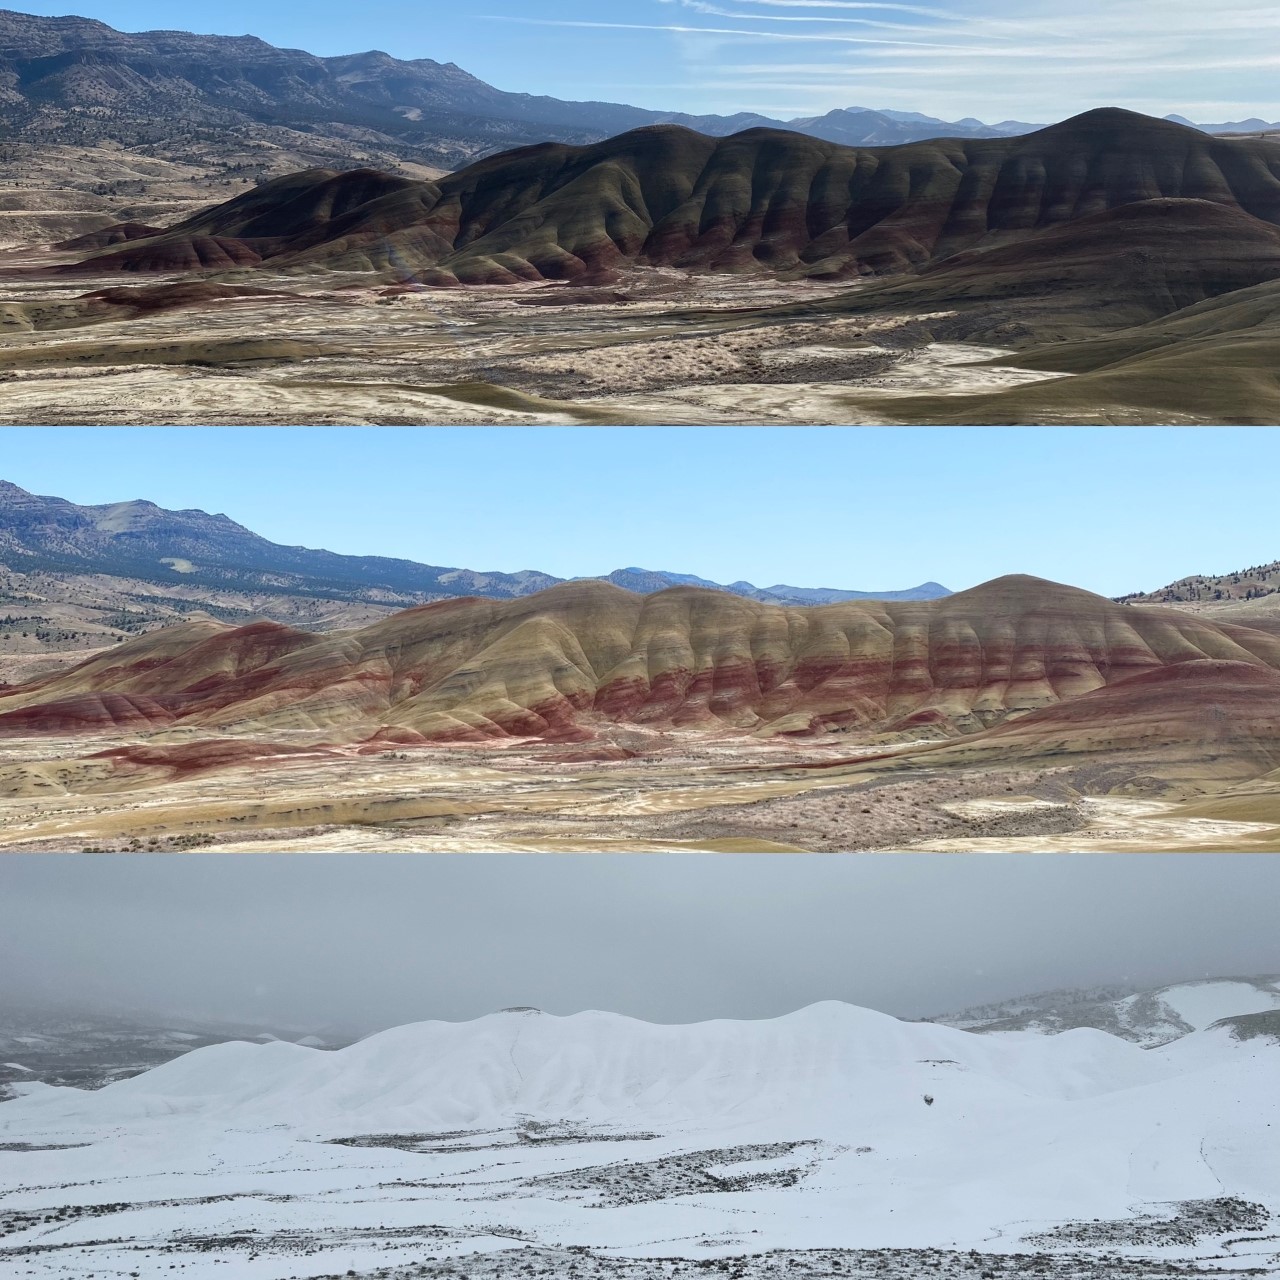 Painted Hills Unit - John Day Fossil Beds National Monument (U.S. National  Park Service)